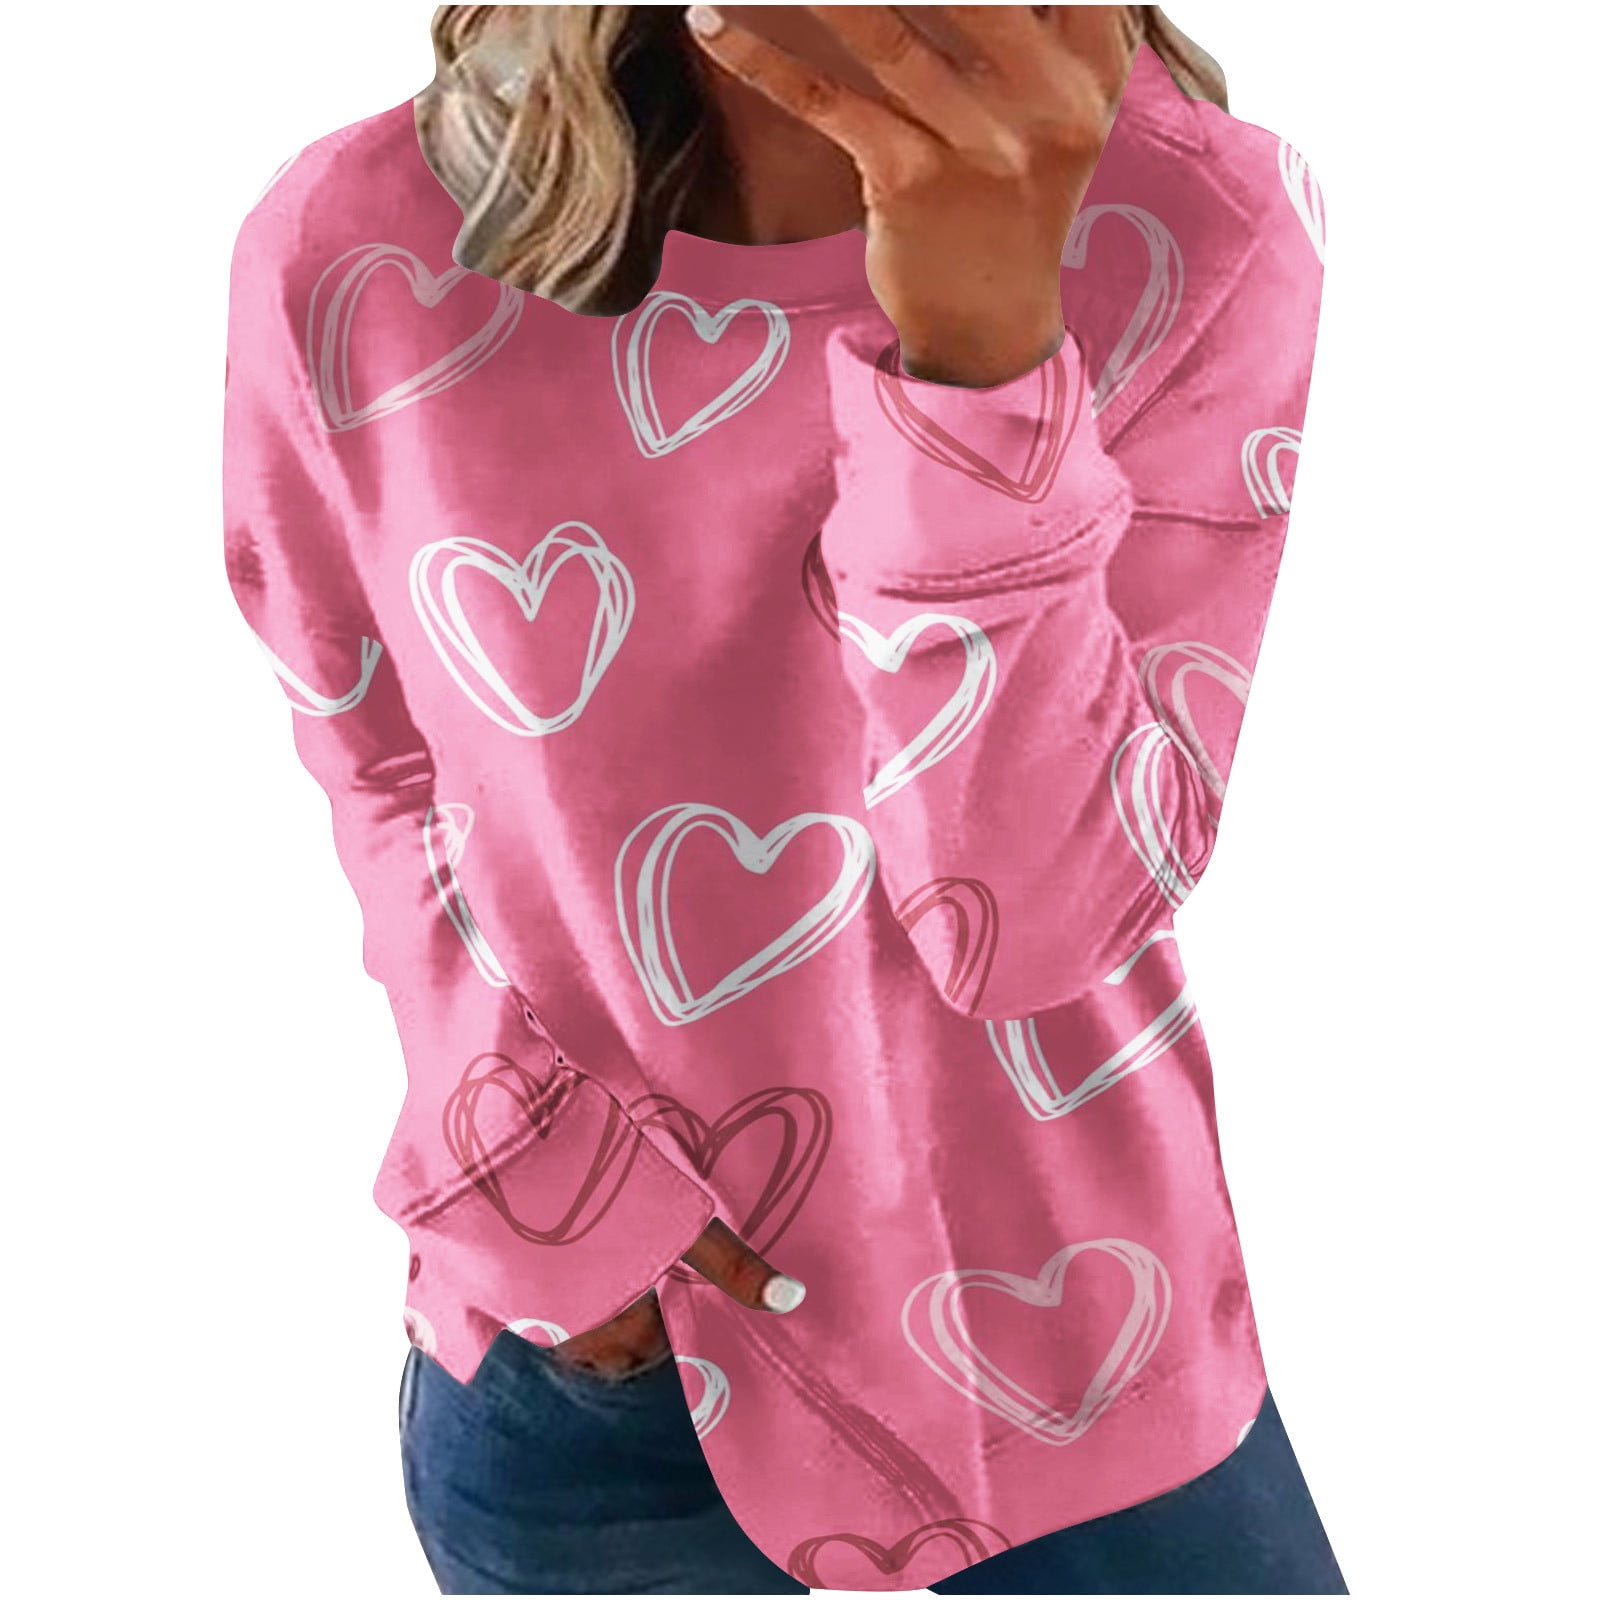 Ruziyoog Valentine's Day Women Novelty Hoodies 3D Heart Printed Hooded  Sweatshirt Long Sleeve Fleece Lined Shirts with Pockets at  Women's  Clothing store